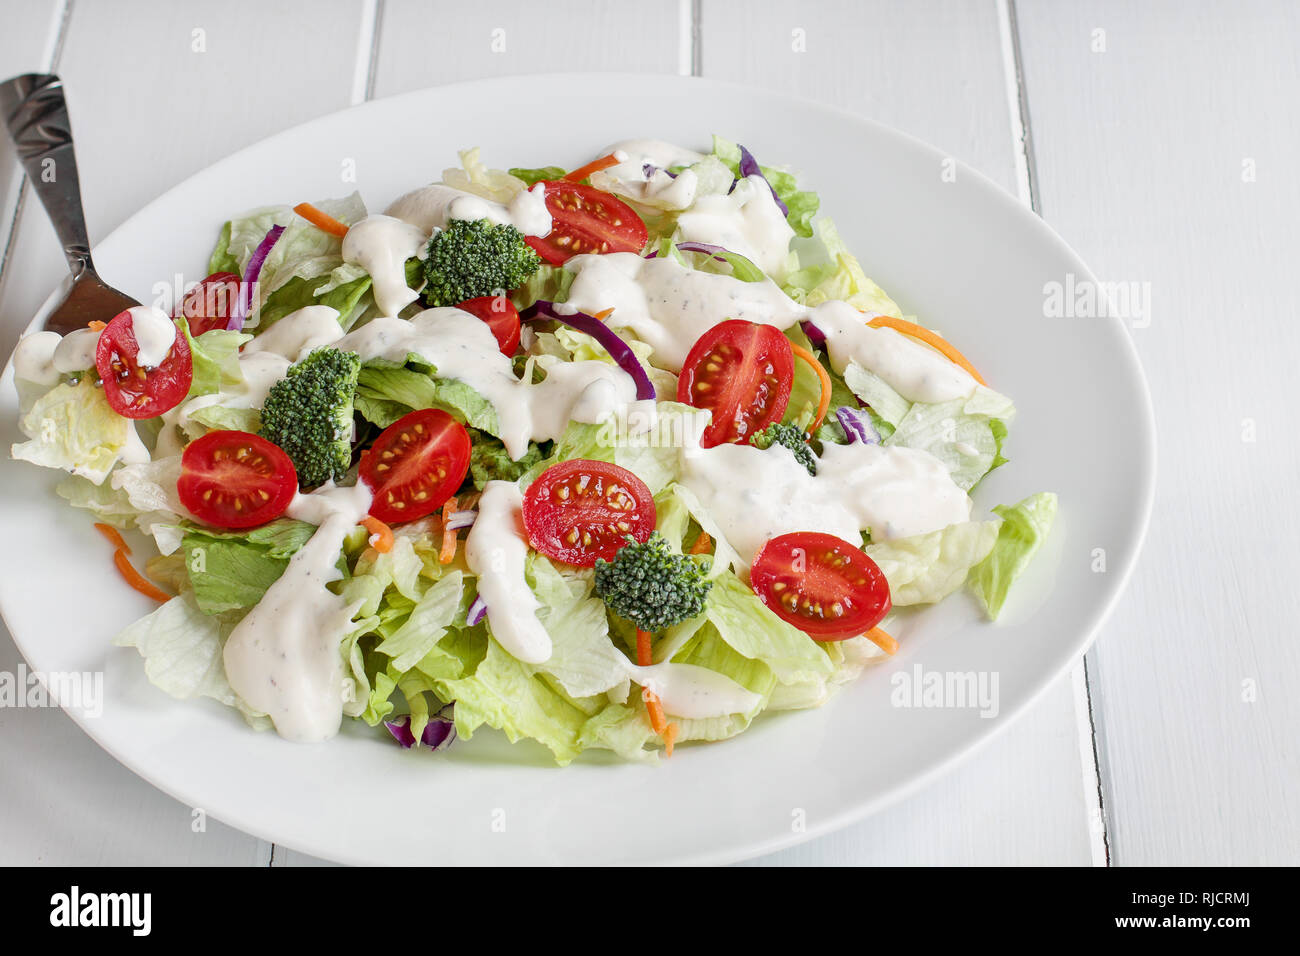 https://c8.alamy.com/comp/RJCRMJ/plate-of-homemade-fresh-salad-with-buttermilk-ranch-dressing-tomatoes-broccoli-cabbage-and-carrots-served-over-a-white-wooden-table-house-salad-RJCRMJ.jpg